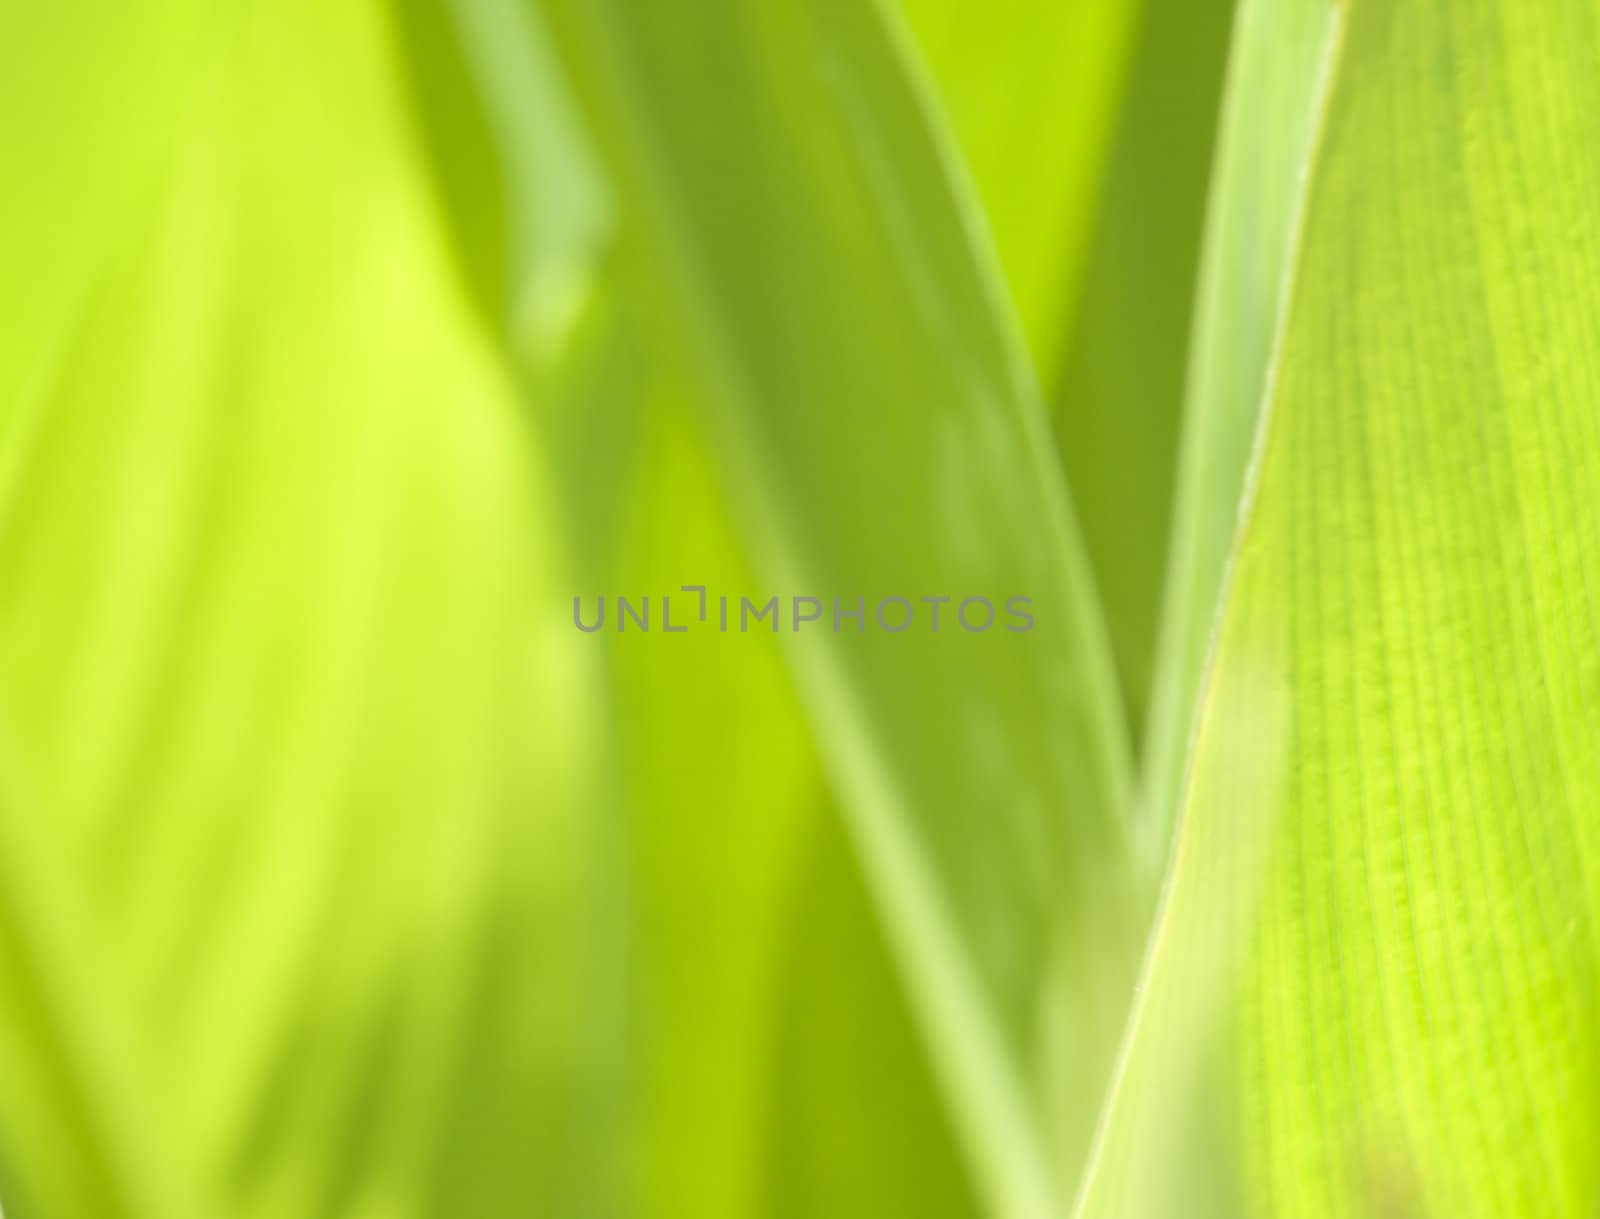 Abstract image showing leaf detail ideal for backdrop or background